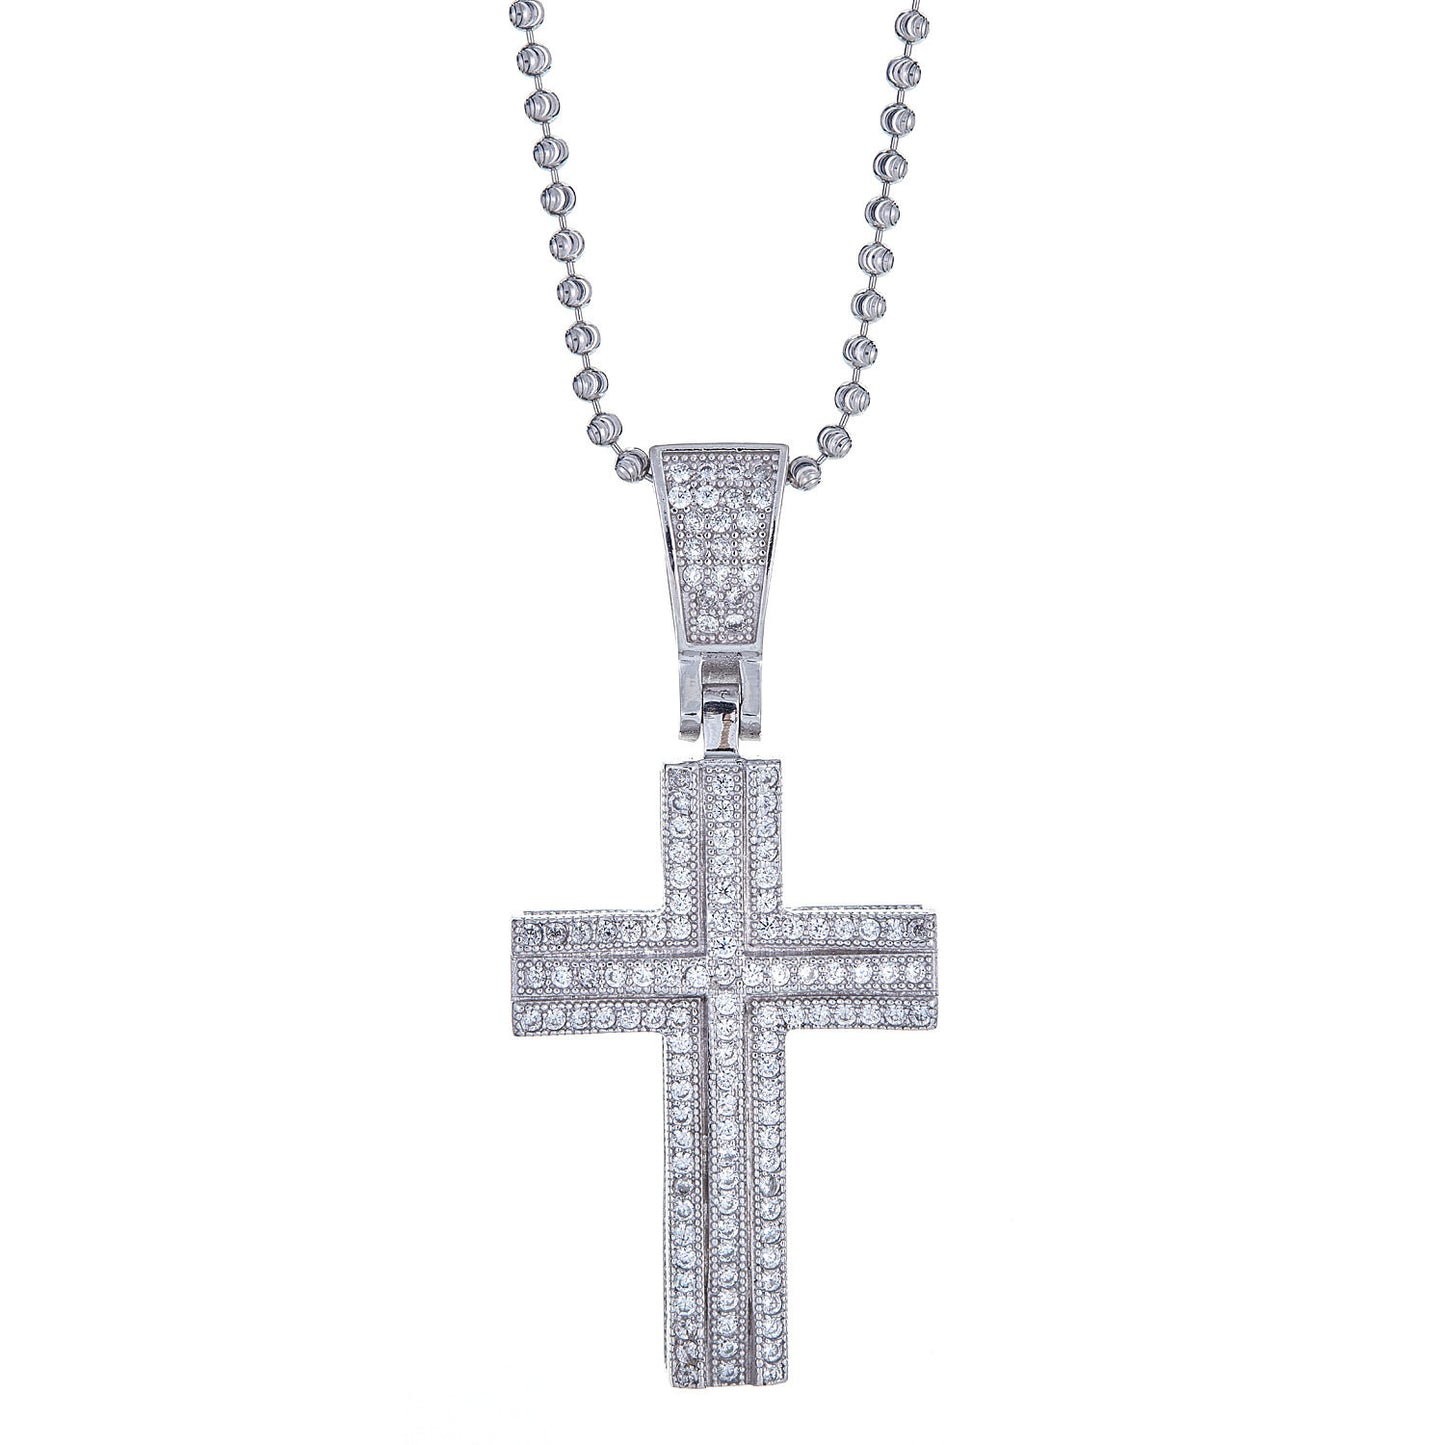 925 Sterling Silver Cross Micro Pave Pendant and Moon Cut Chain, 20 grams - Betterjewelry